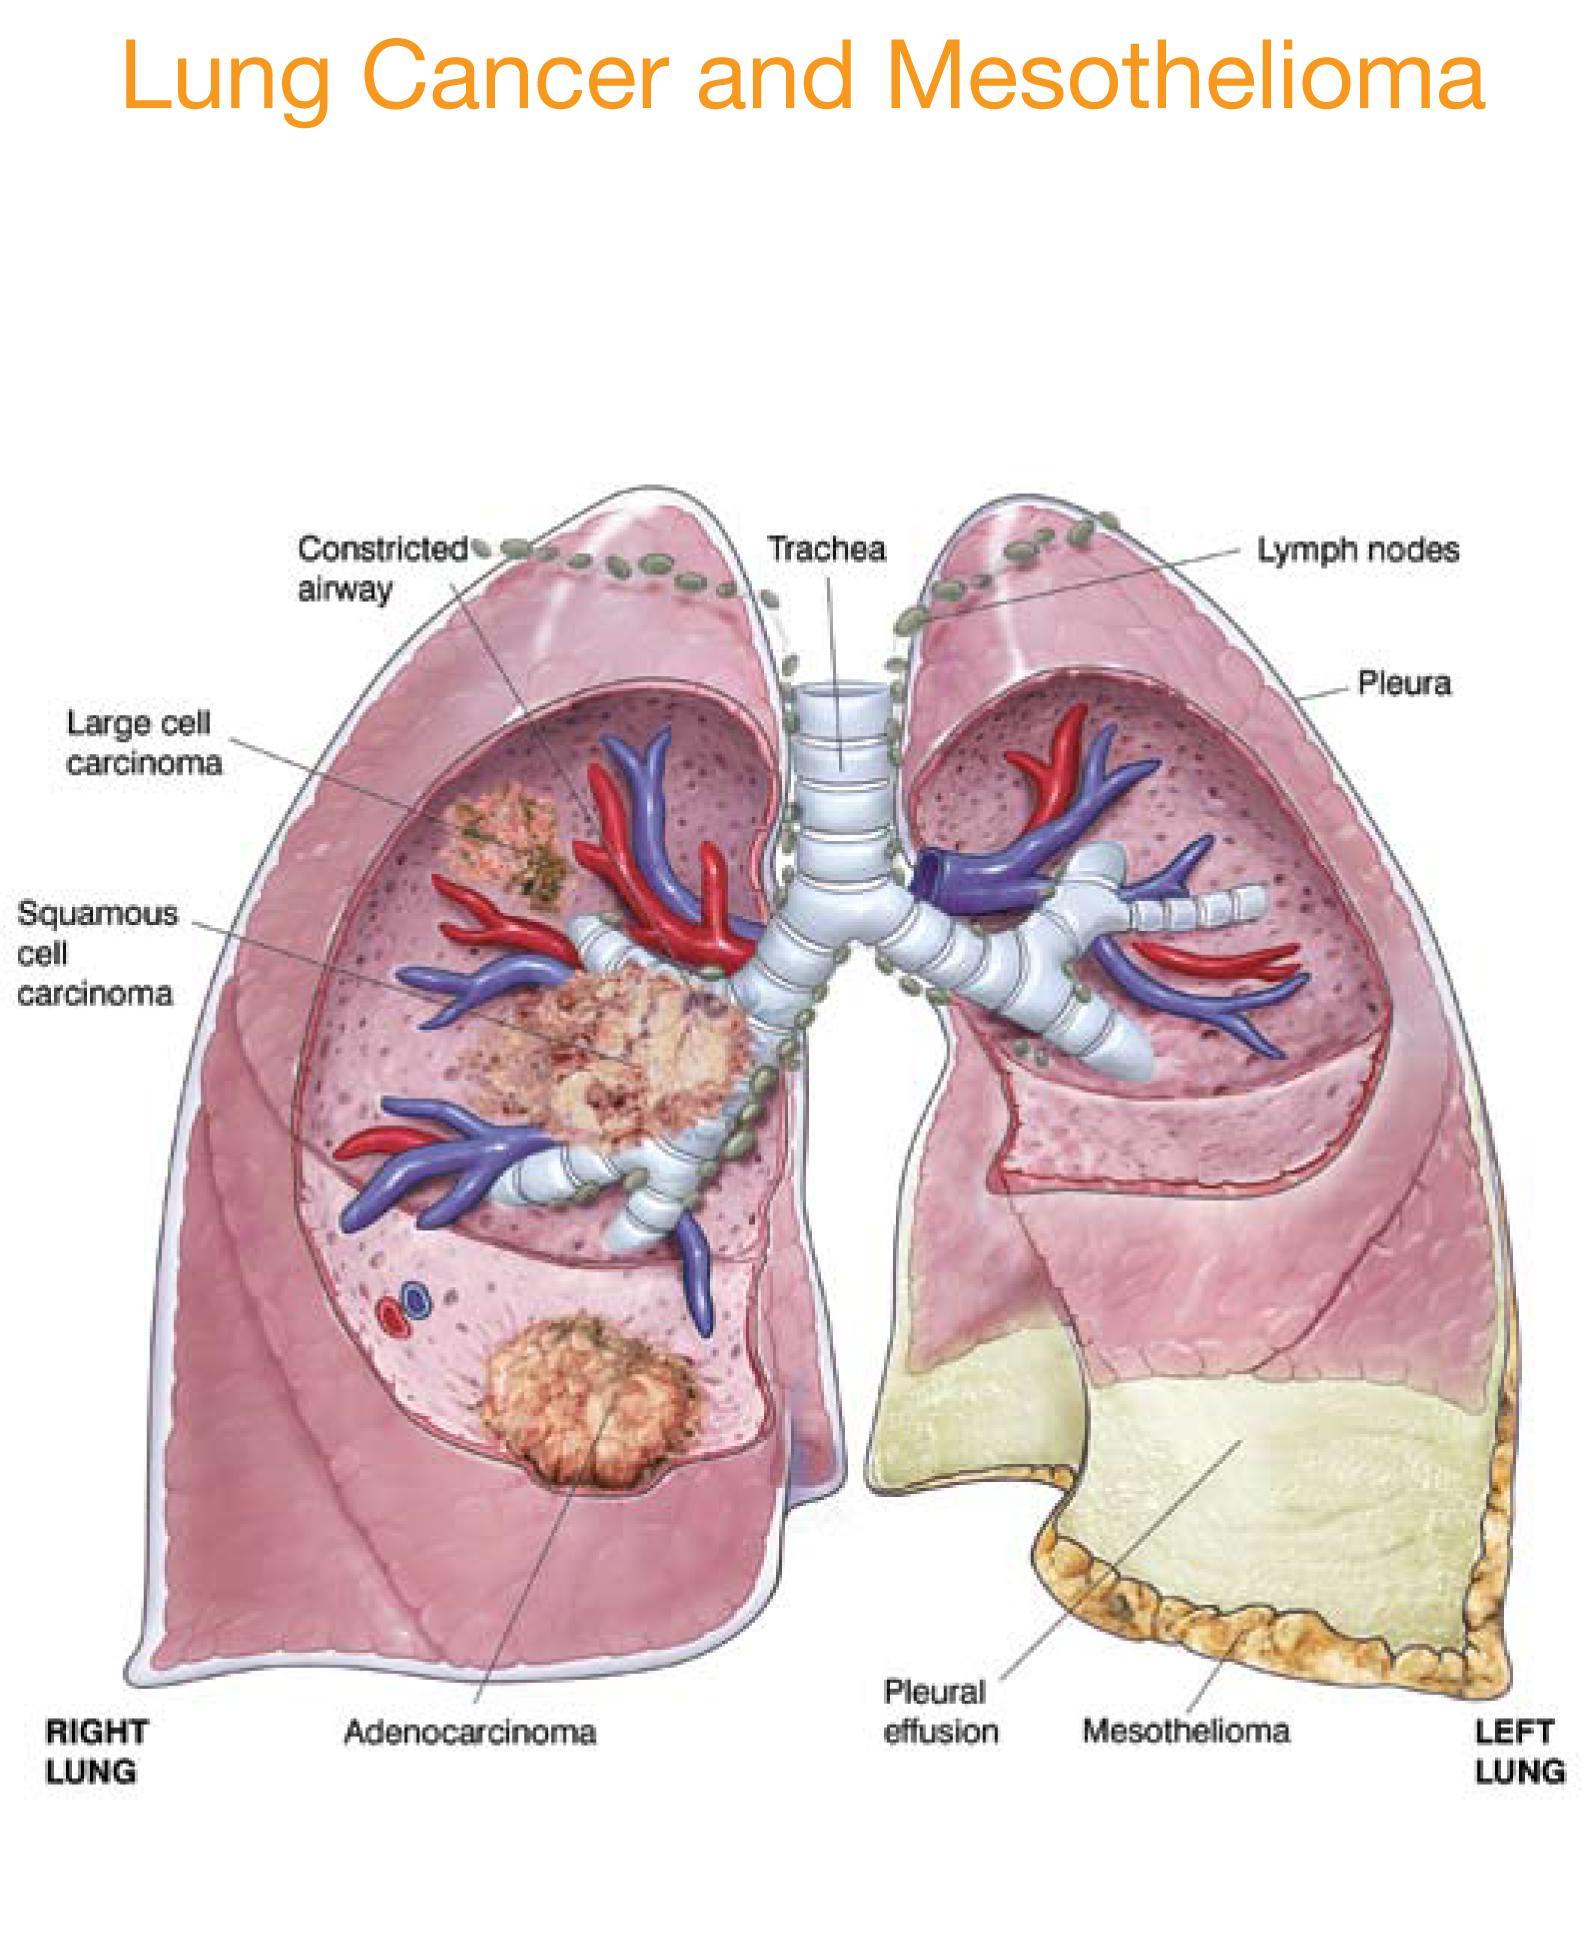 Lung Cancer and Mesothelioma - AMAA